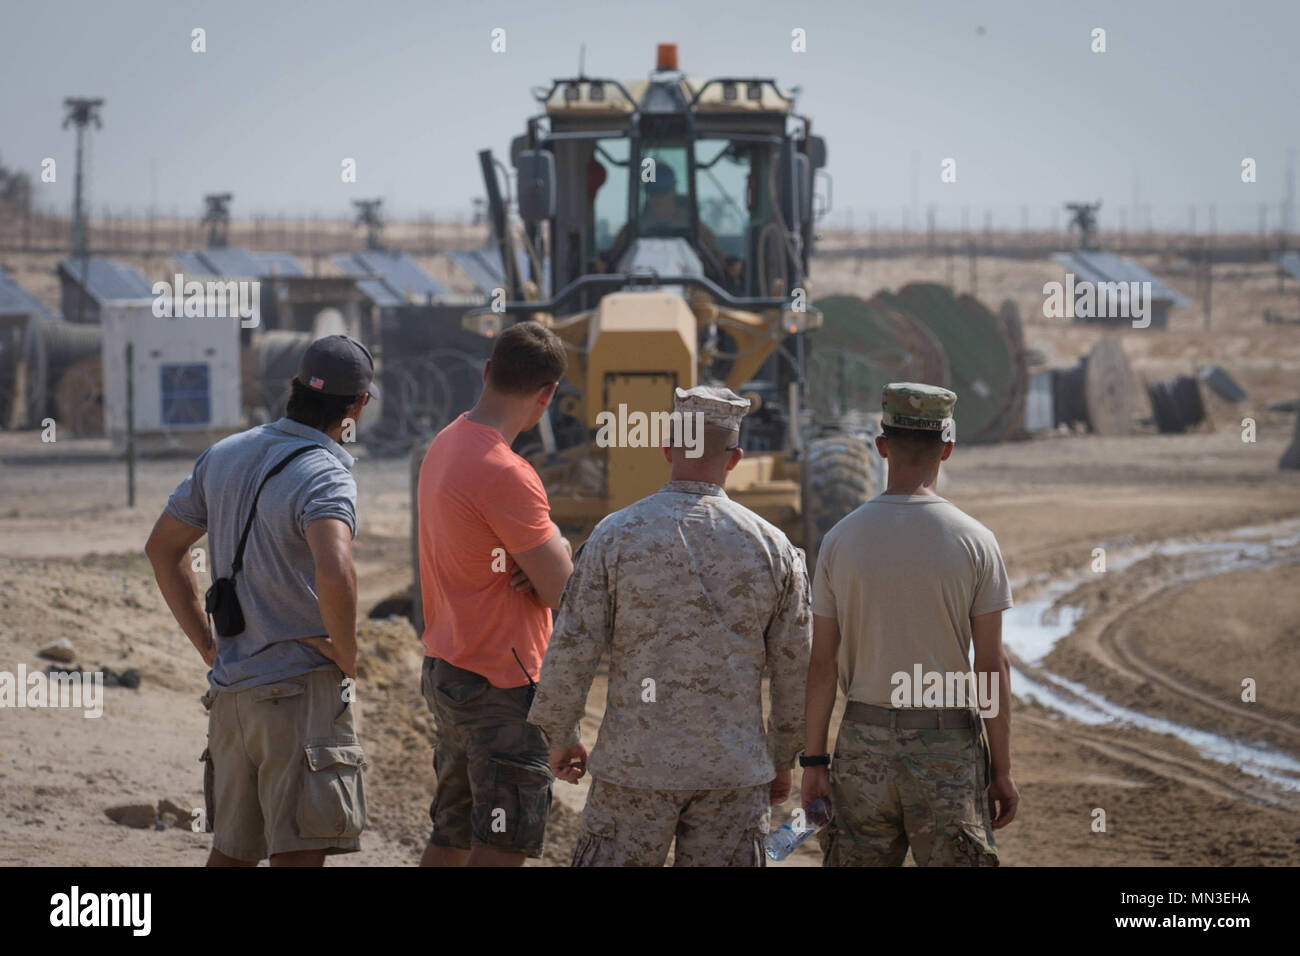 U.S. Service members observe a road grater as it digs trenches into the soil in order to make it malleable while deployed in the Middle East, Aug. 23, 2017. Special Purpose Marine Air-Ground Task Force – Crisis Response – Central Command Marines with Marine Wing Support Squadron 372 practiced interoperability with other military branches while testing the durability and life expectancy of a new road-building product. Stock Photo